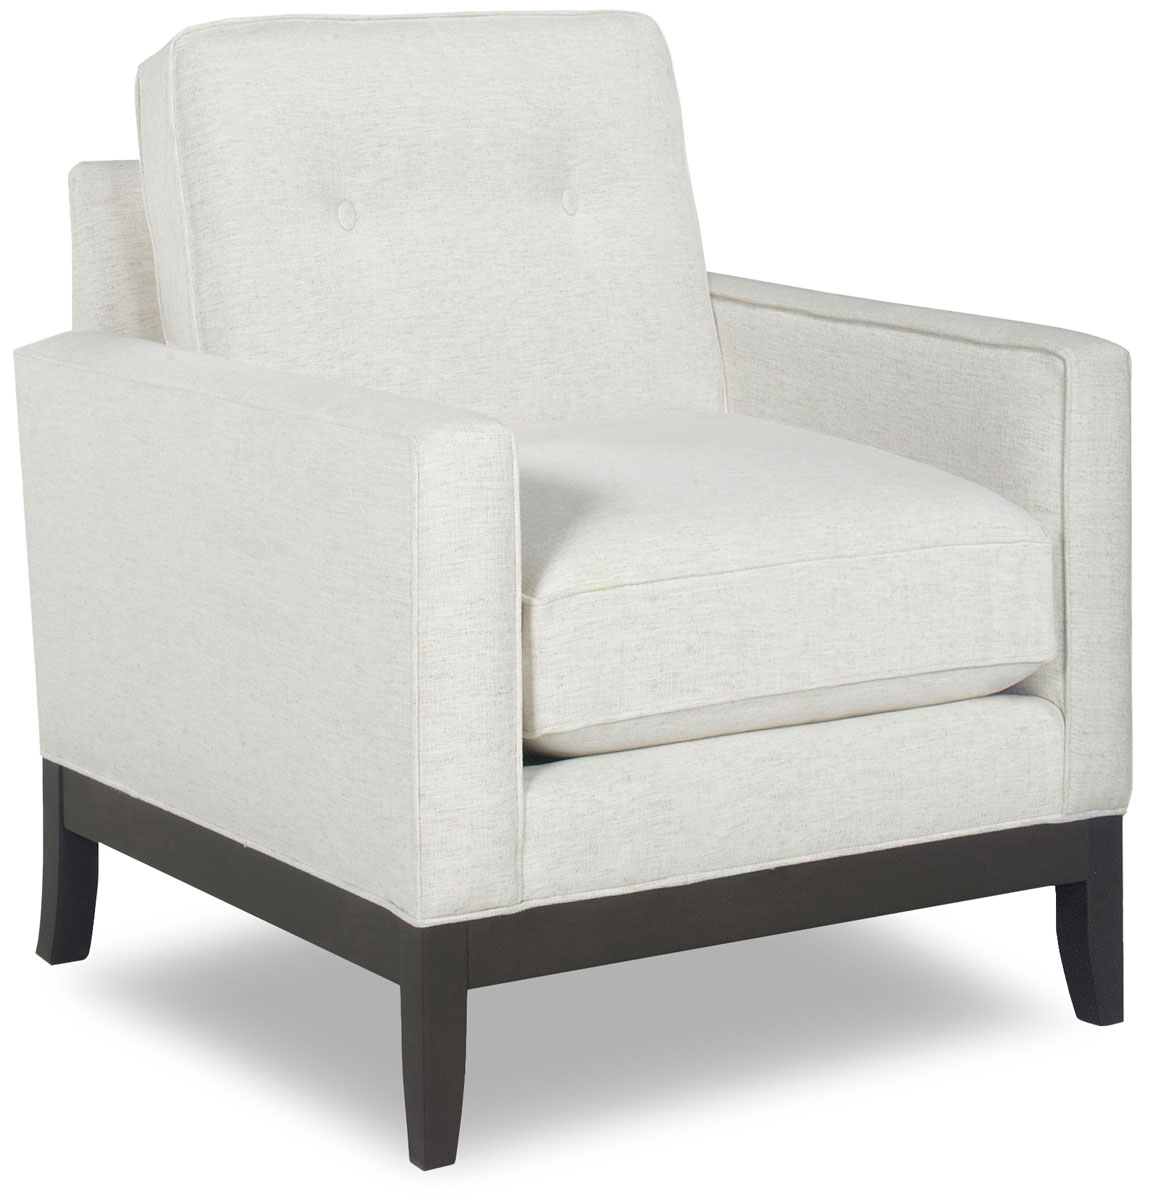 Temple Furniture 9205 Reese Chair